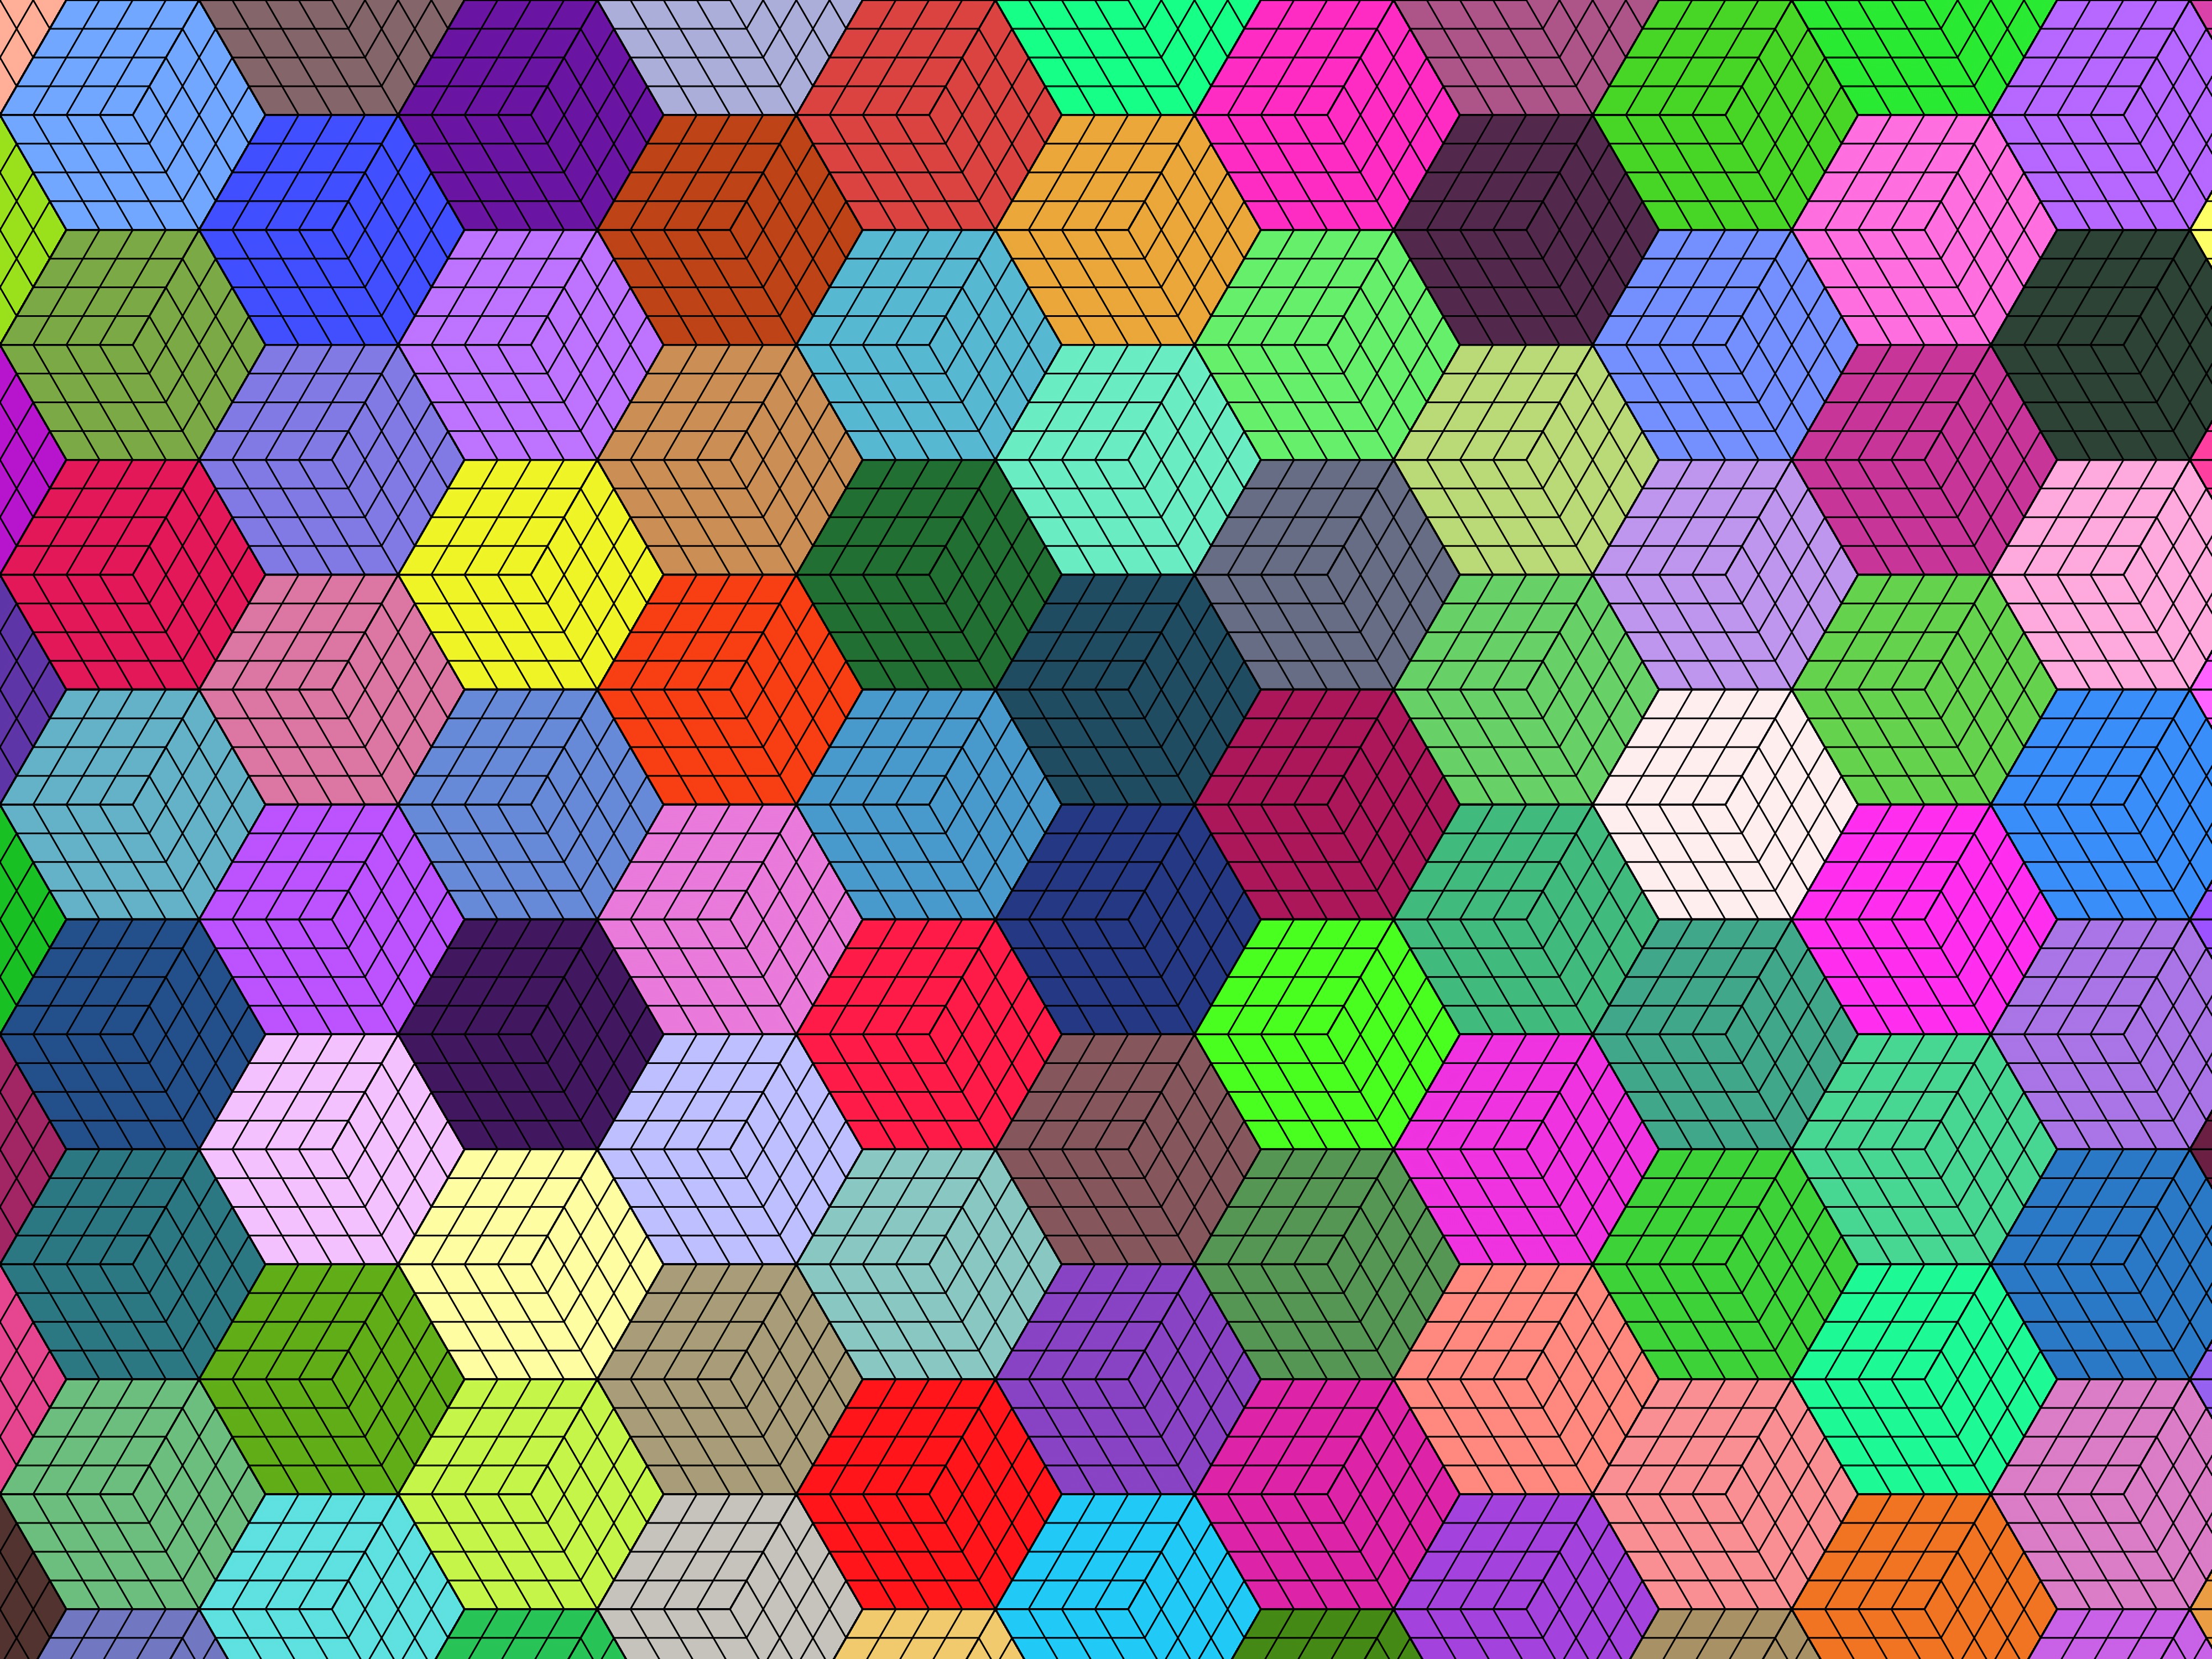 motley, geometric, texture, textures, multicolored, hexagons, mosaic High Definition image